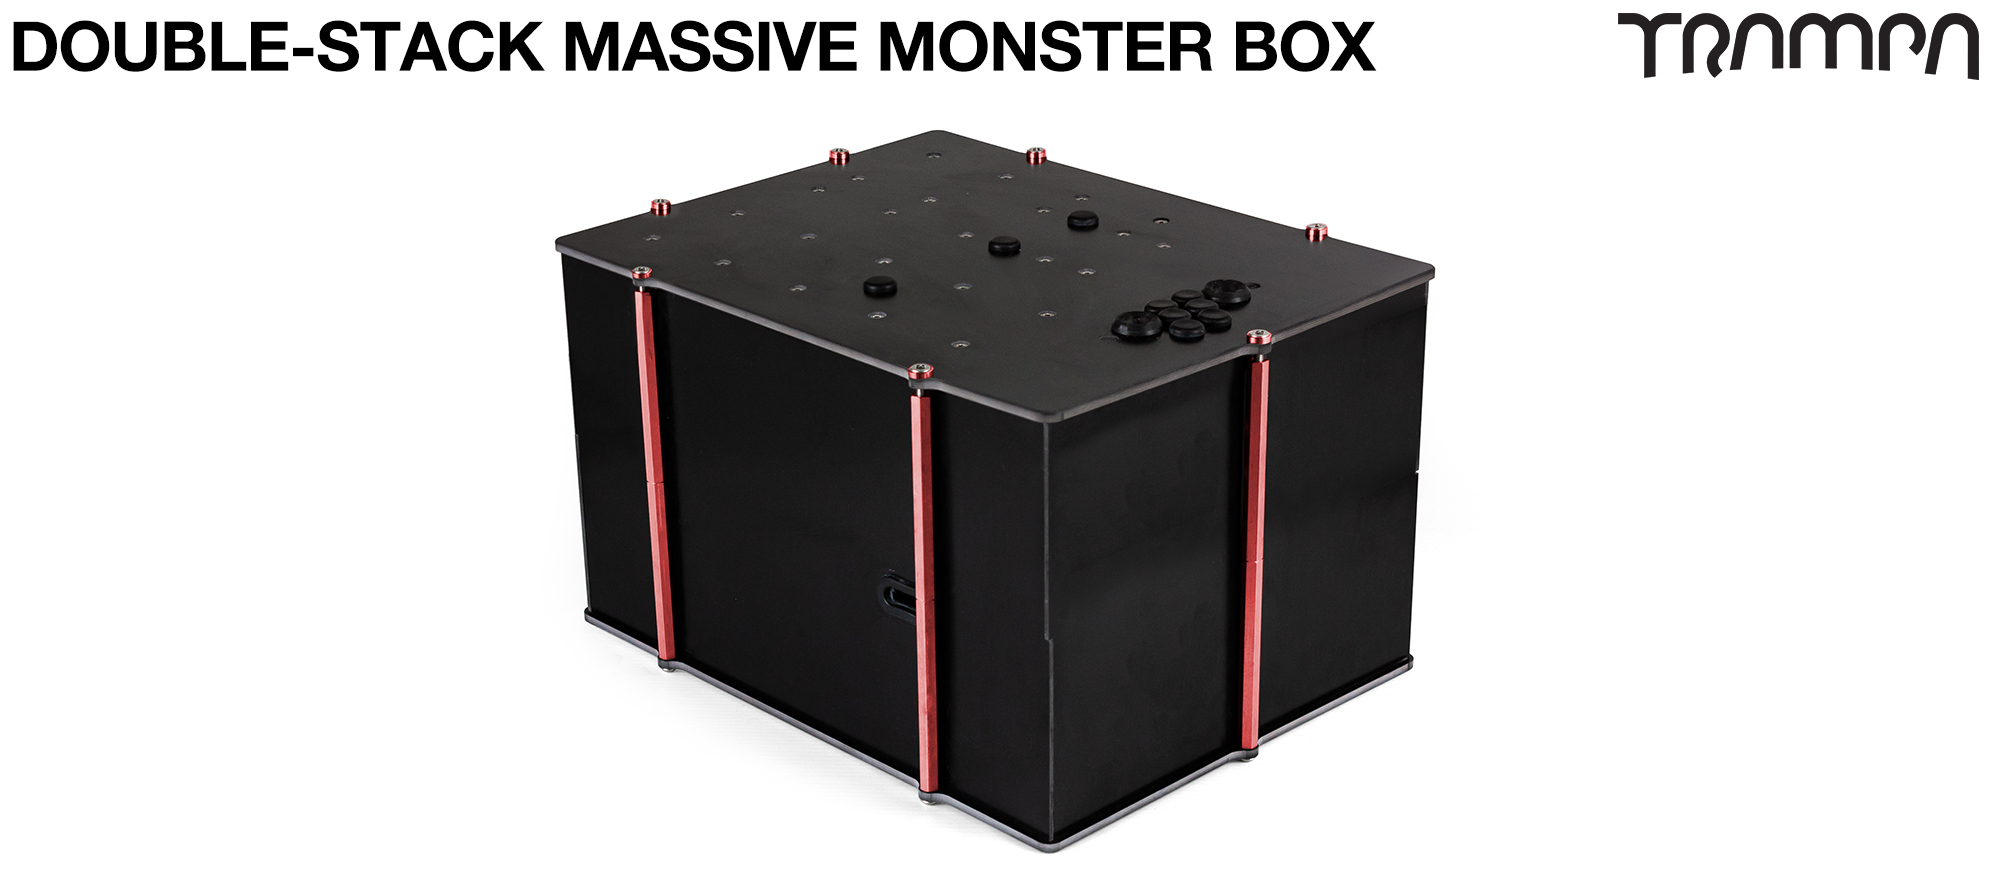 2WD DOUBLE STACK MASSIVE MONSTER Box Capable of fitting 168x 21700 Li-Ion cells or 2x huge Li-Po Cells, with up to 2x VESC 6 or 1x HD-60T